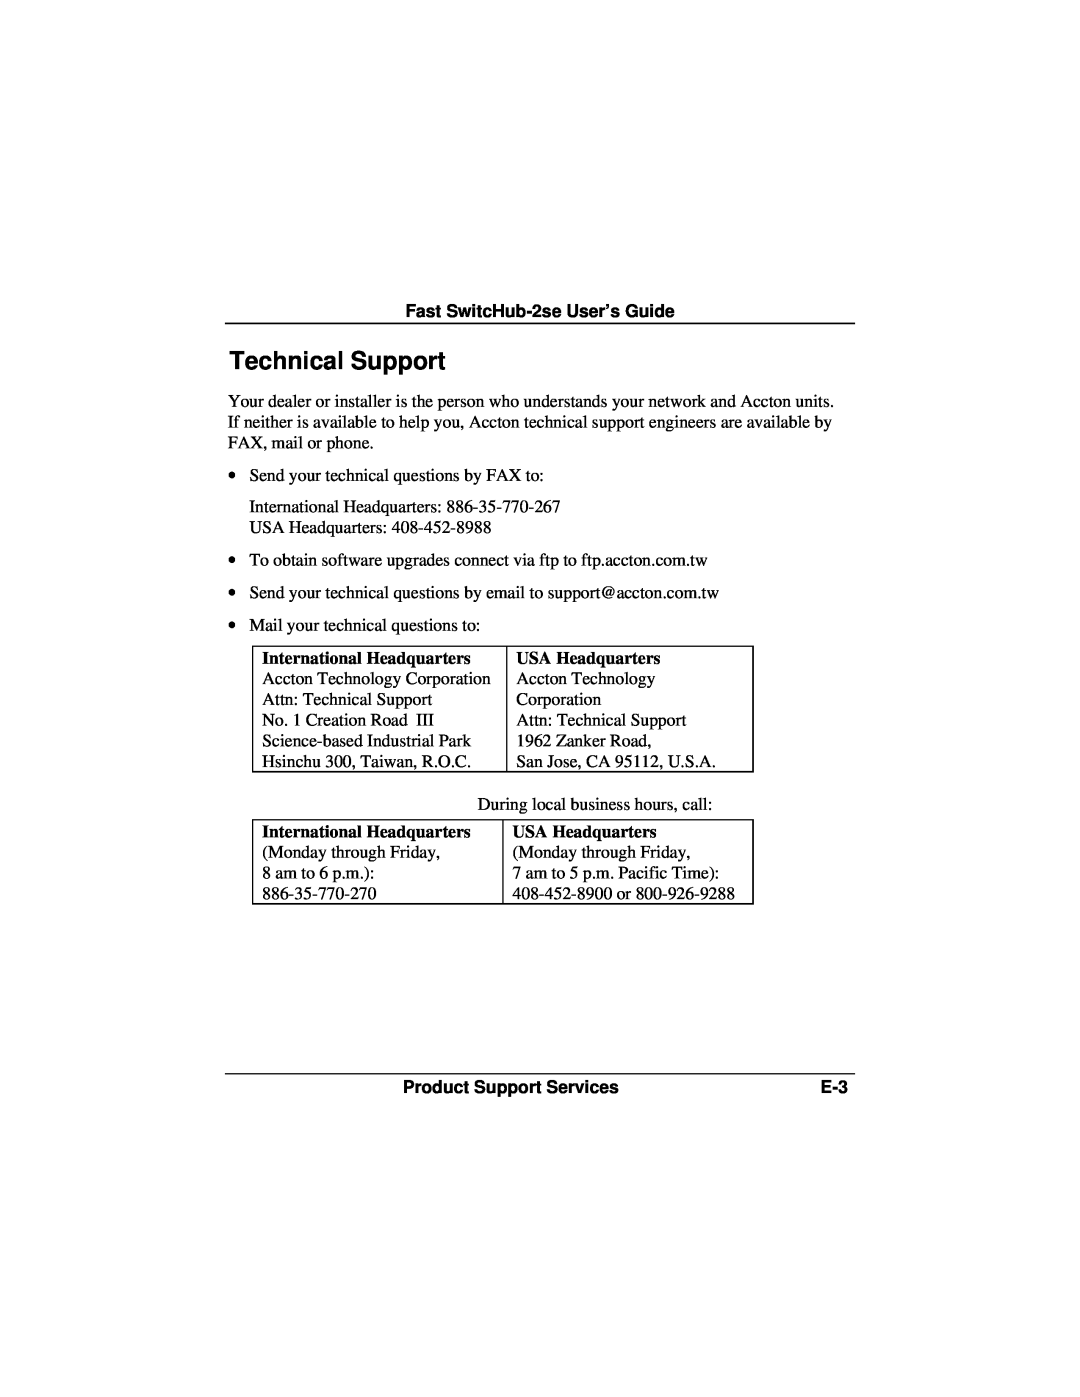 Accton Technology ES3002-TF manual Technical Support, Fast SwitcHub-2se User’s Guide, International Headquarters 